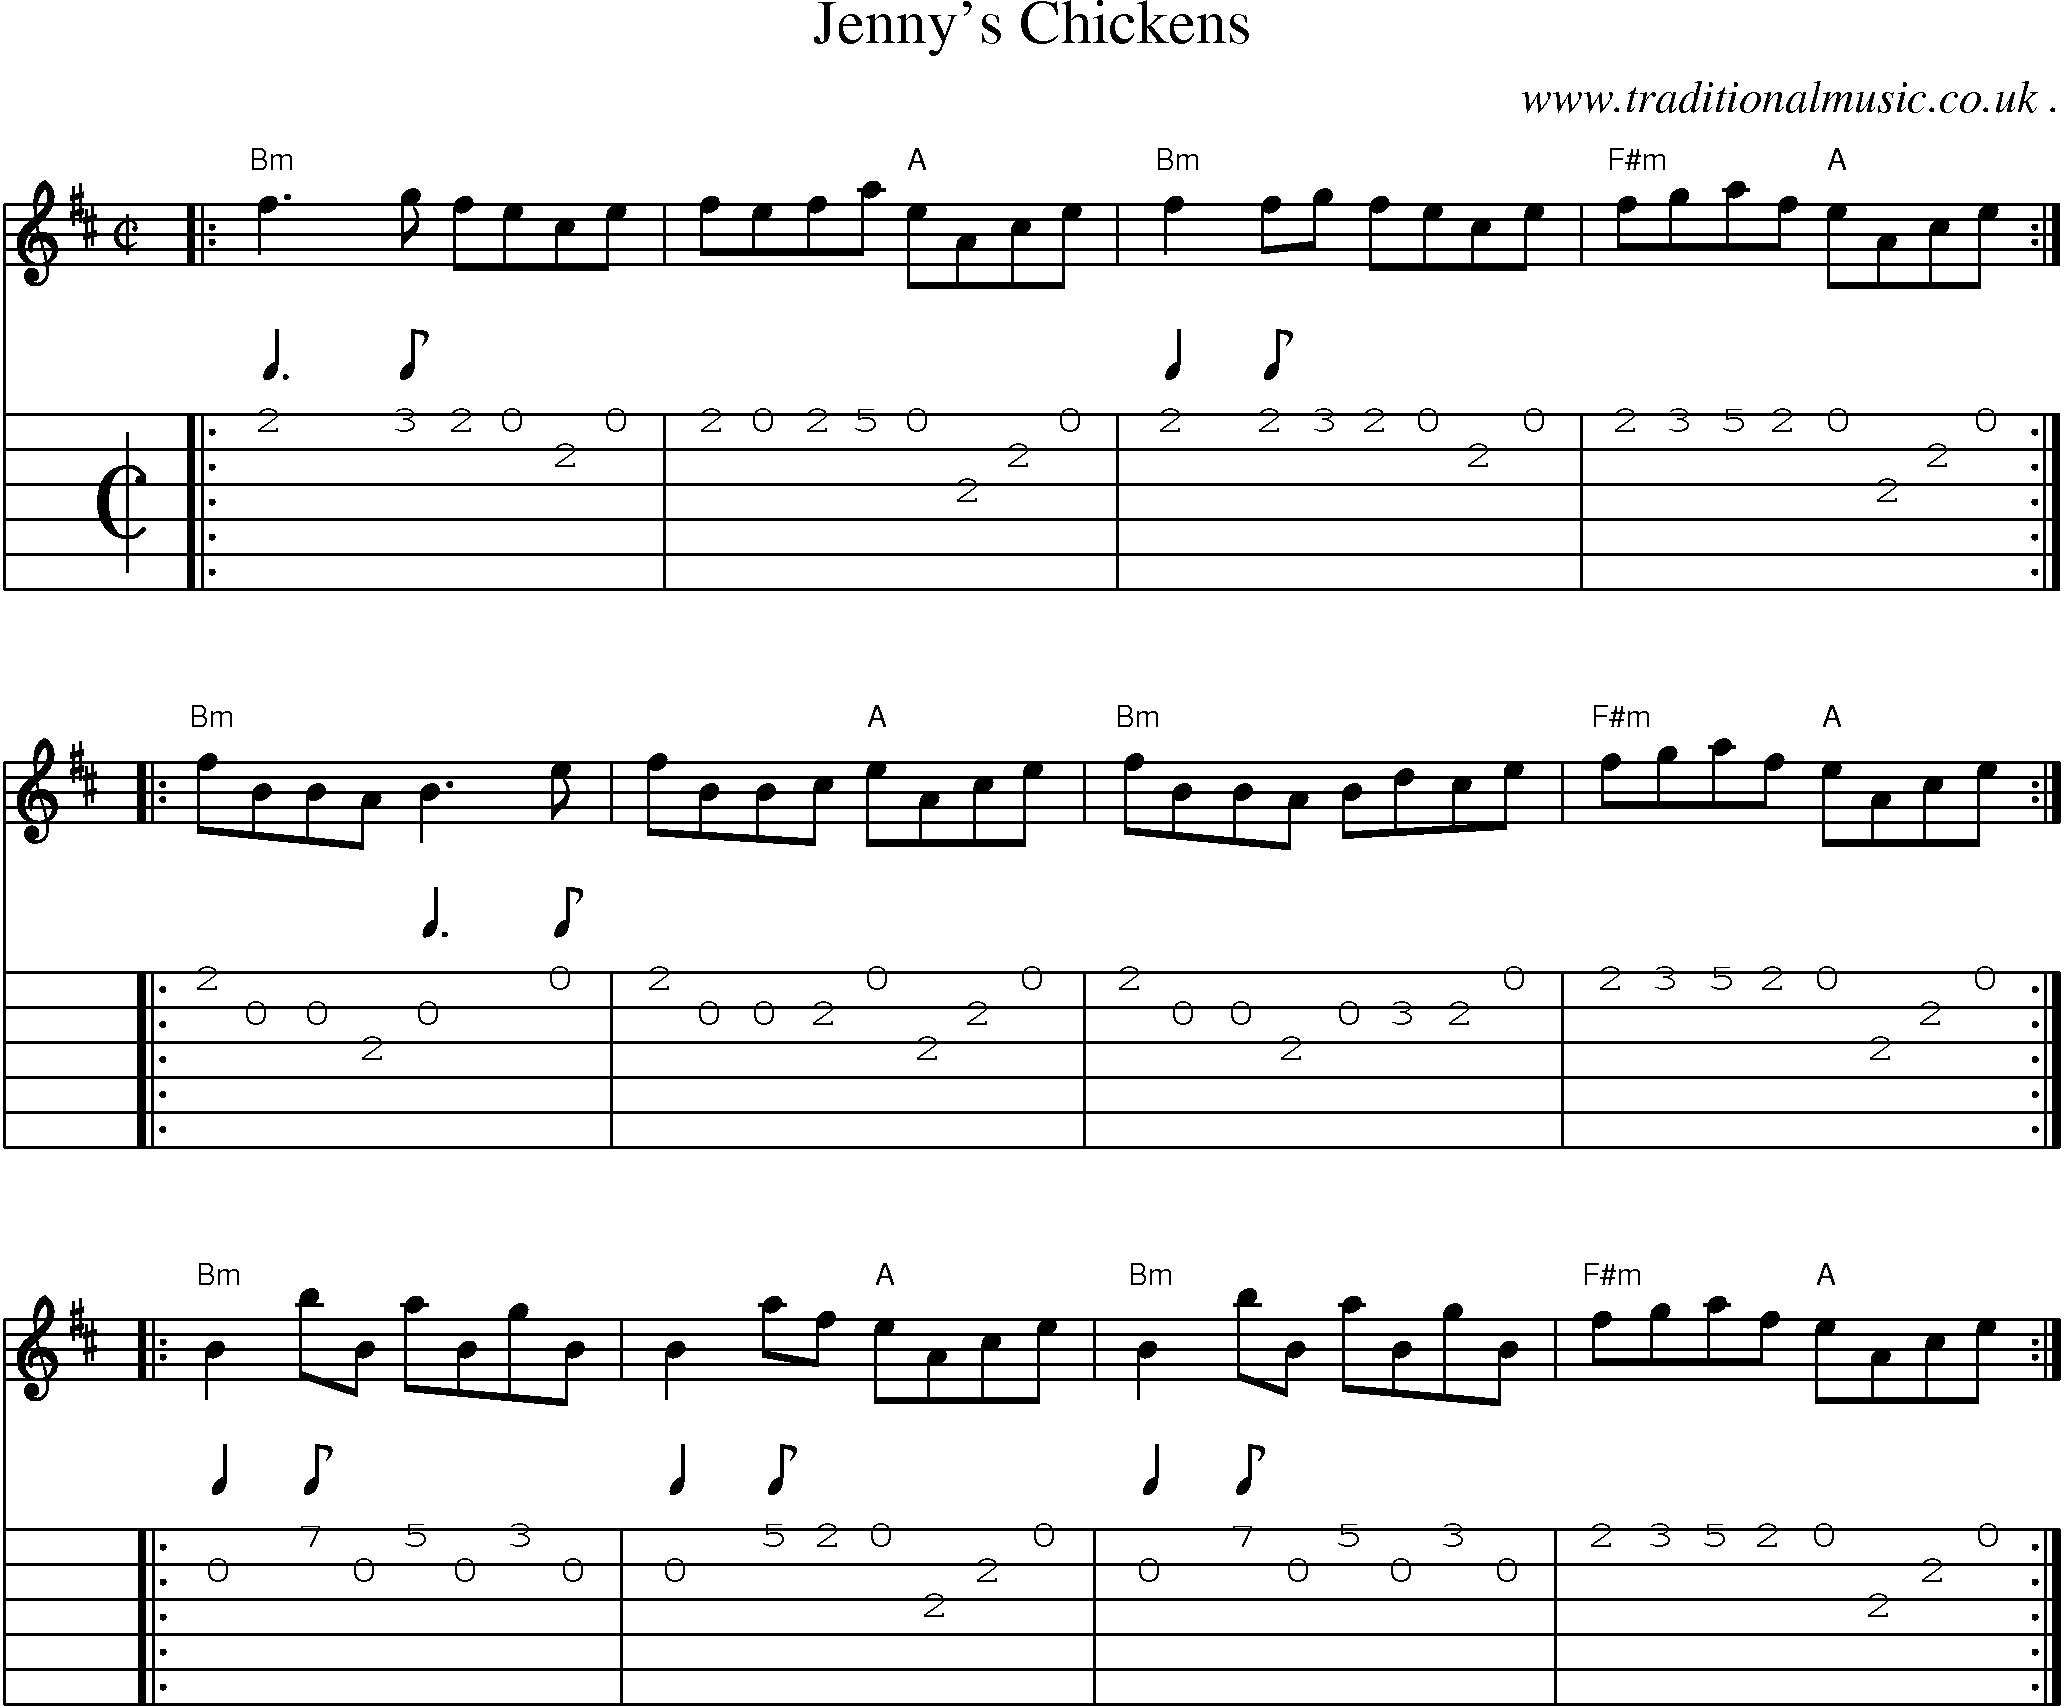 Sheet-music  score, Chords and Guitar Tabs for Jennys Chickens